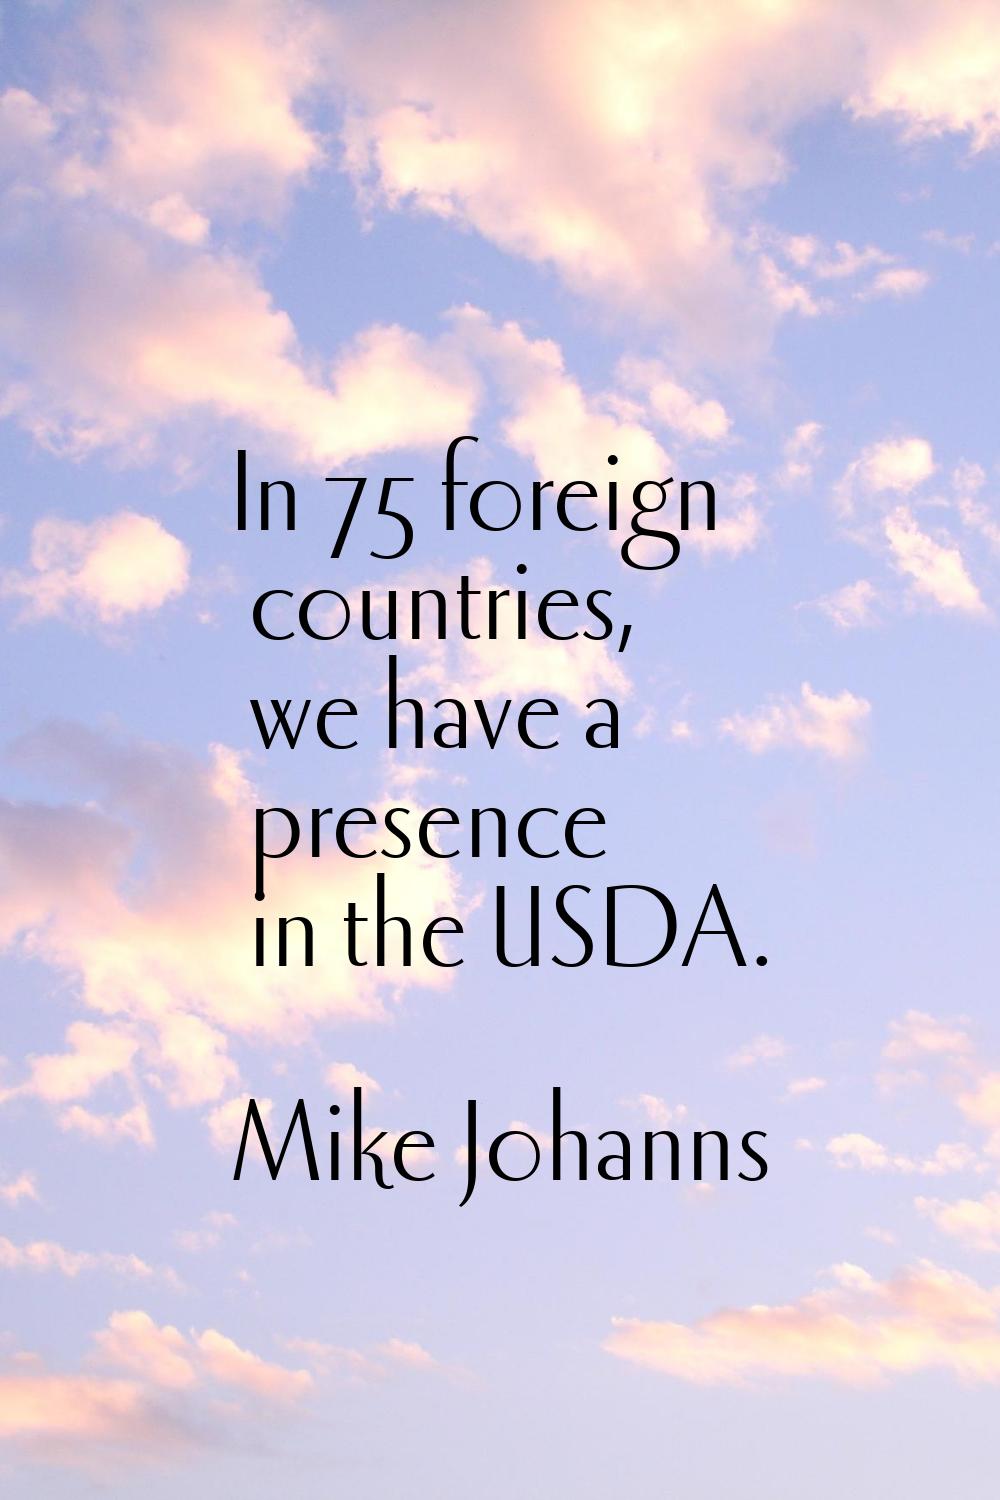 In 75 foreign countries, we have a presence in the USDA.